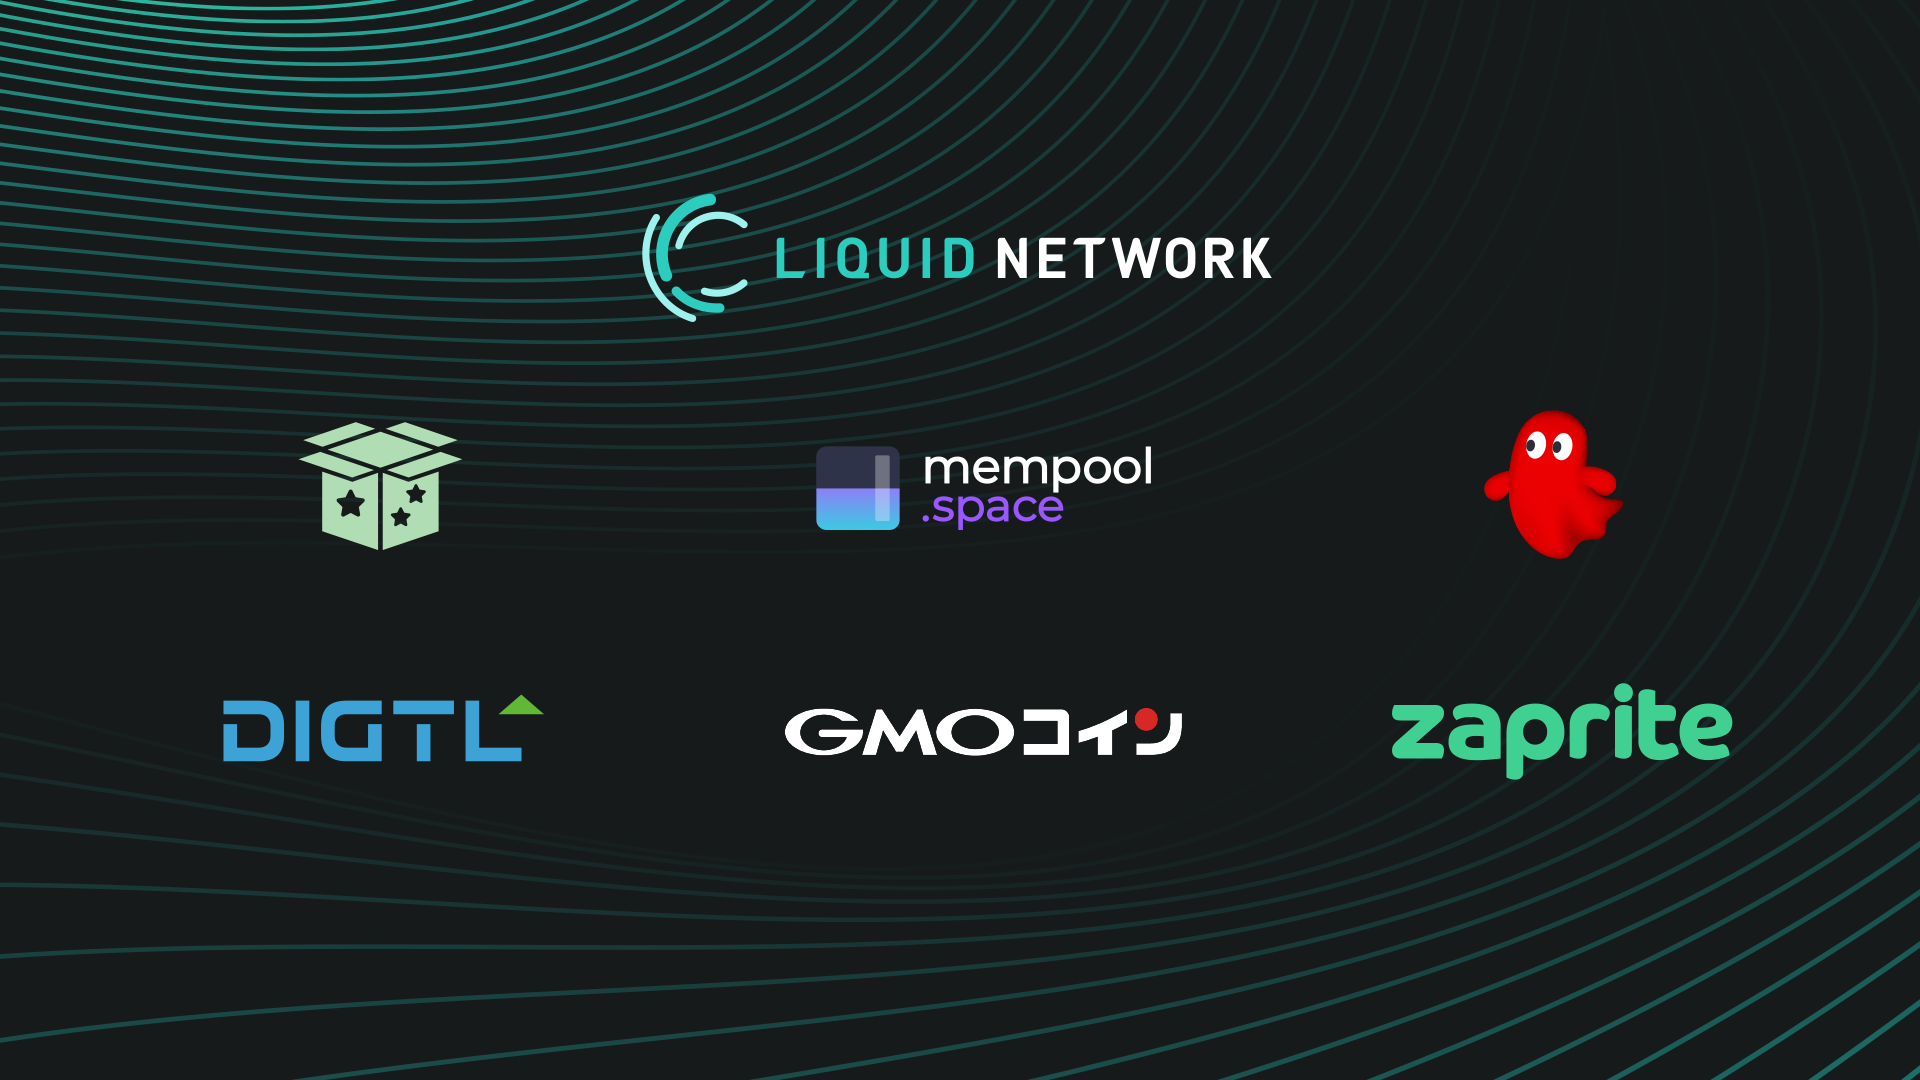 Liquid Federation Growth Continues, Adds Six New Members